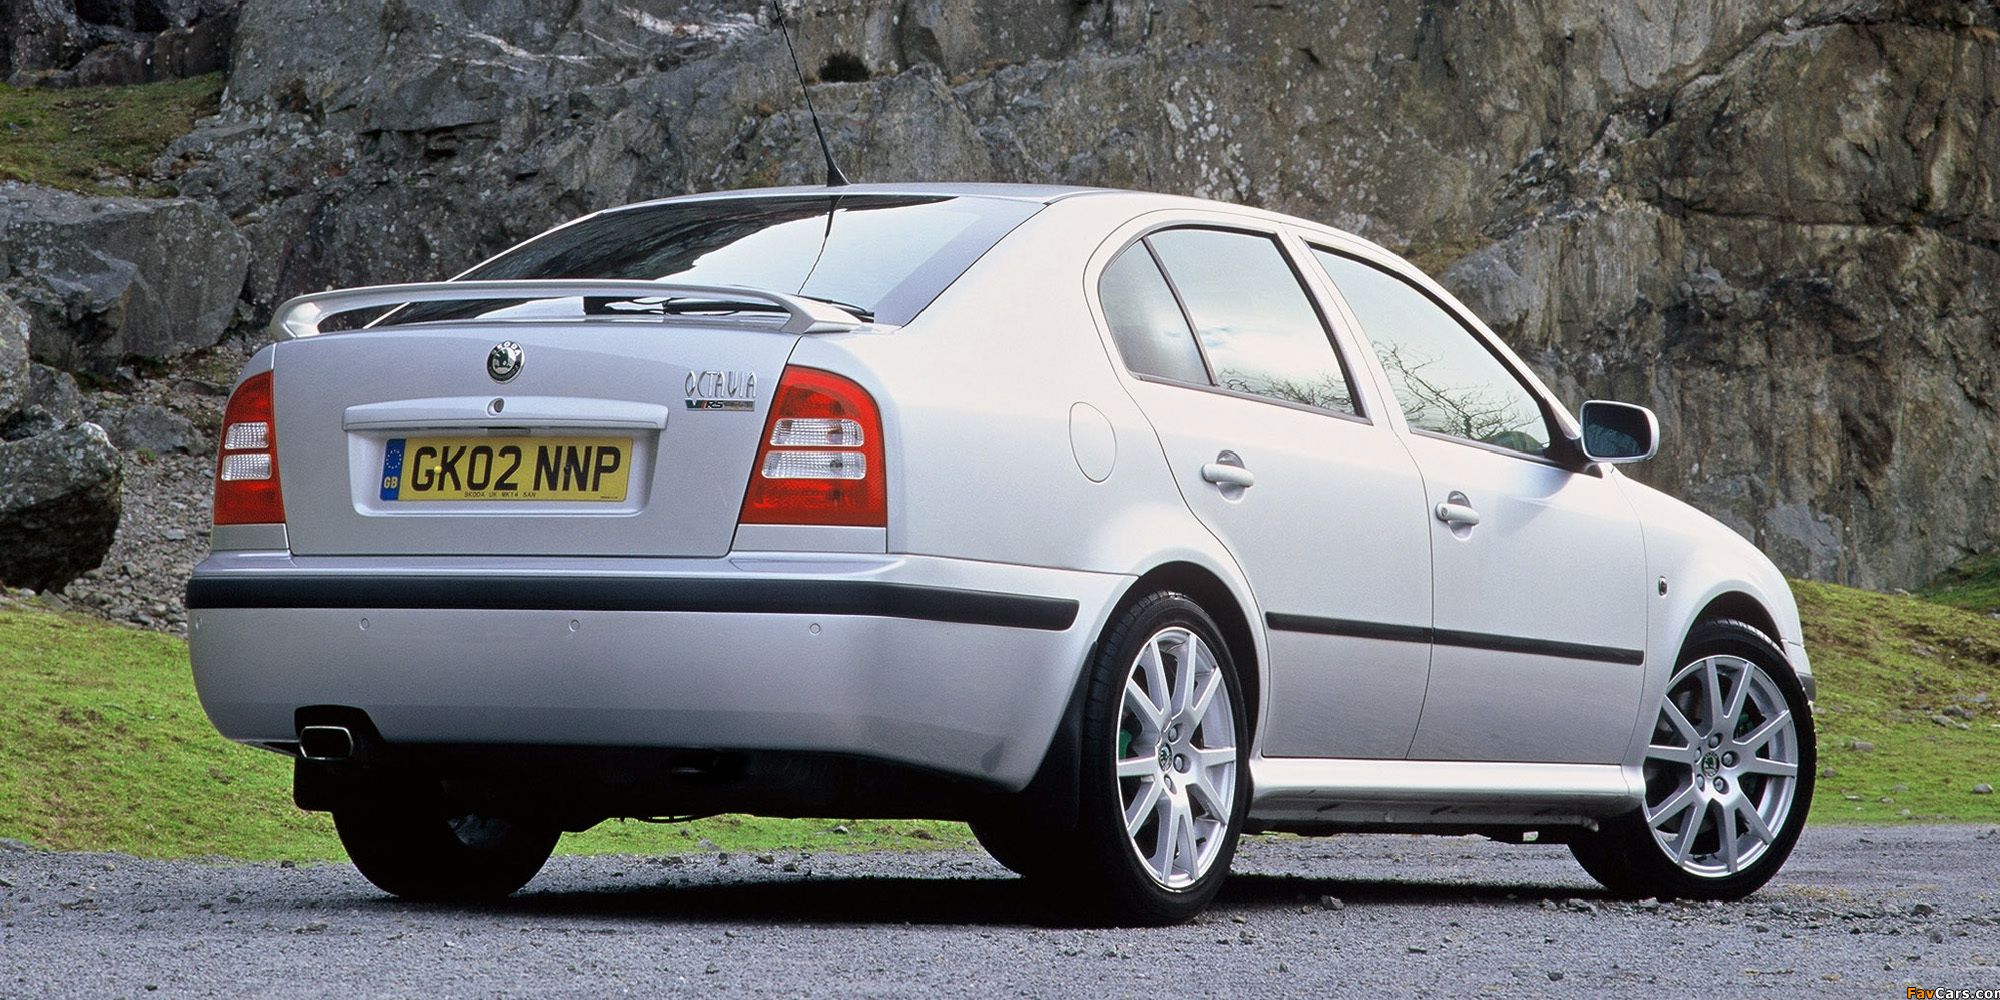 The rear of the Mk1 Octavia RS in silver